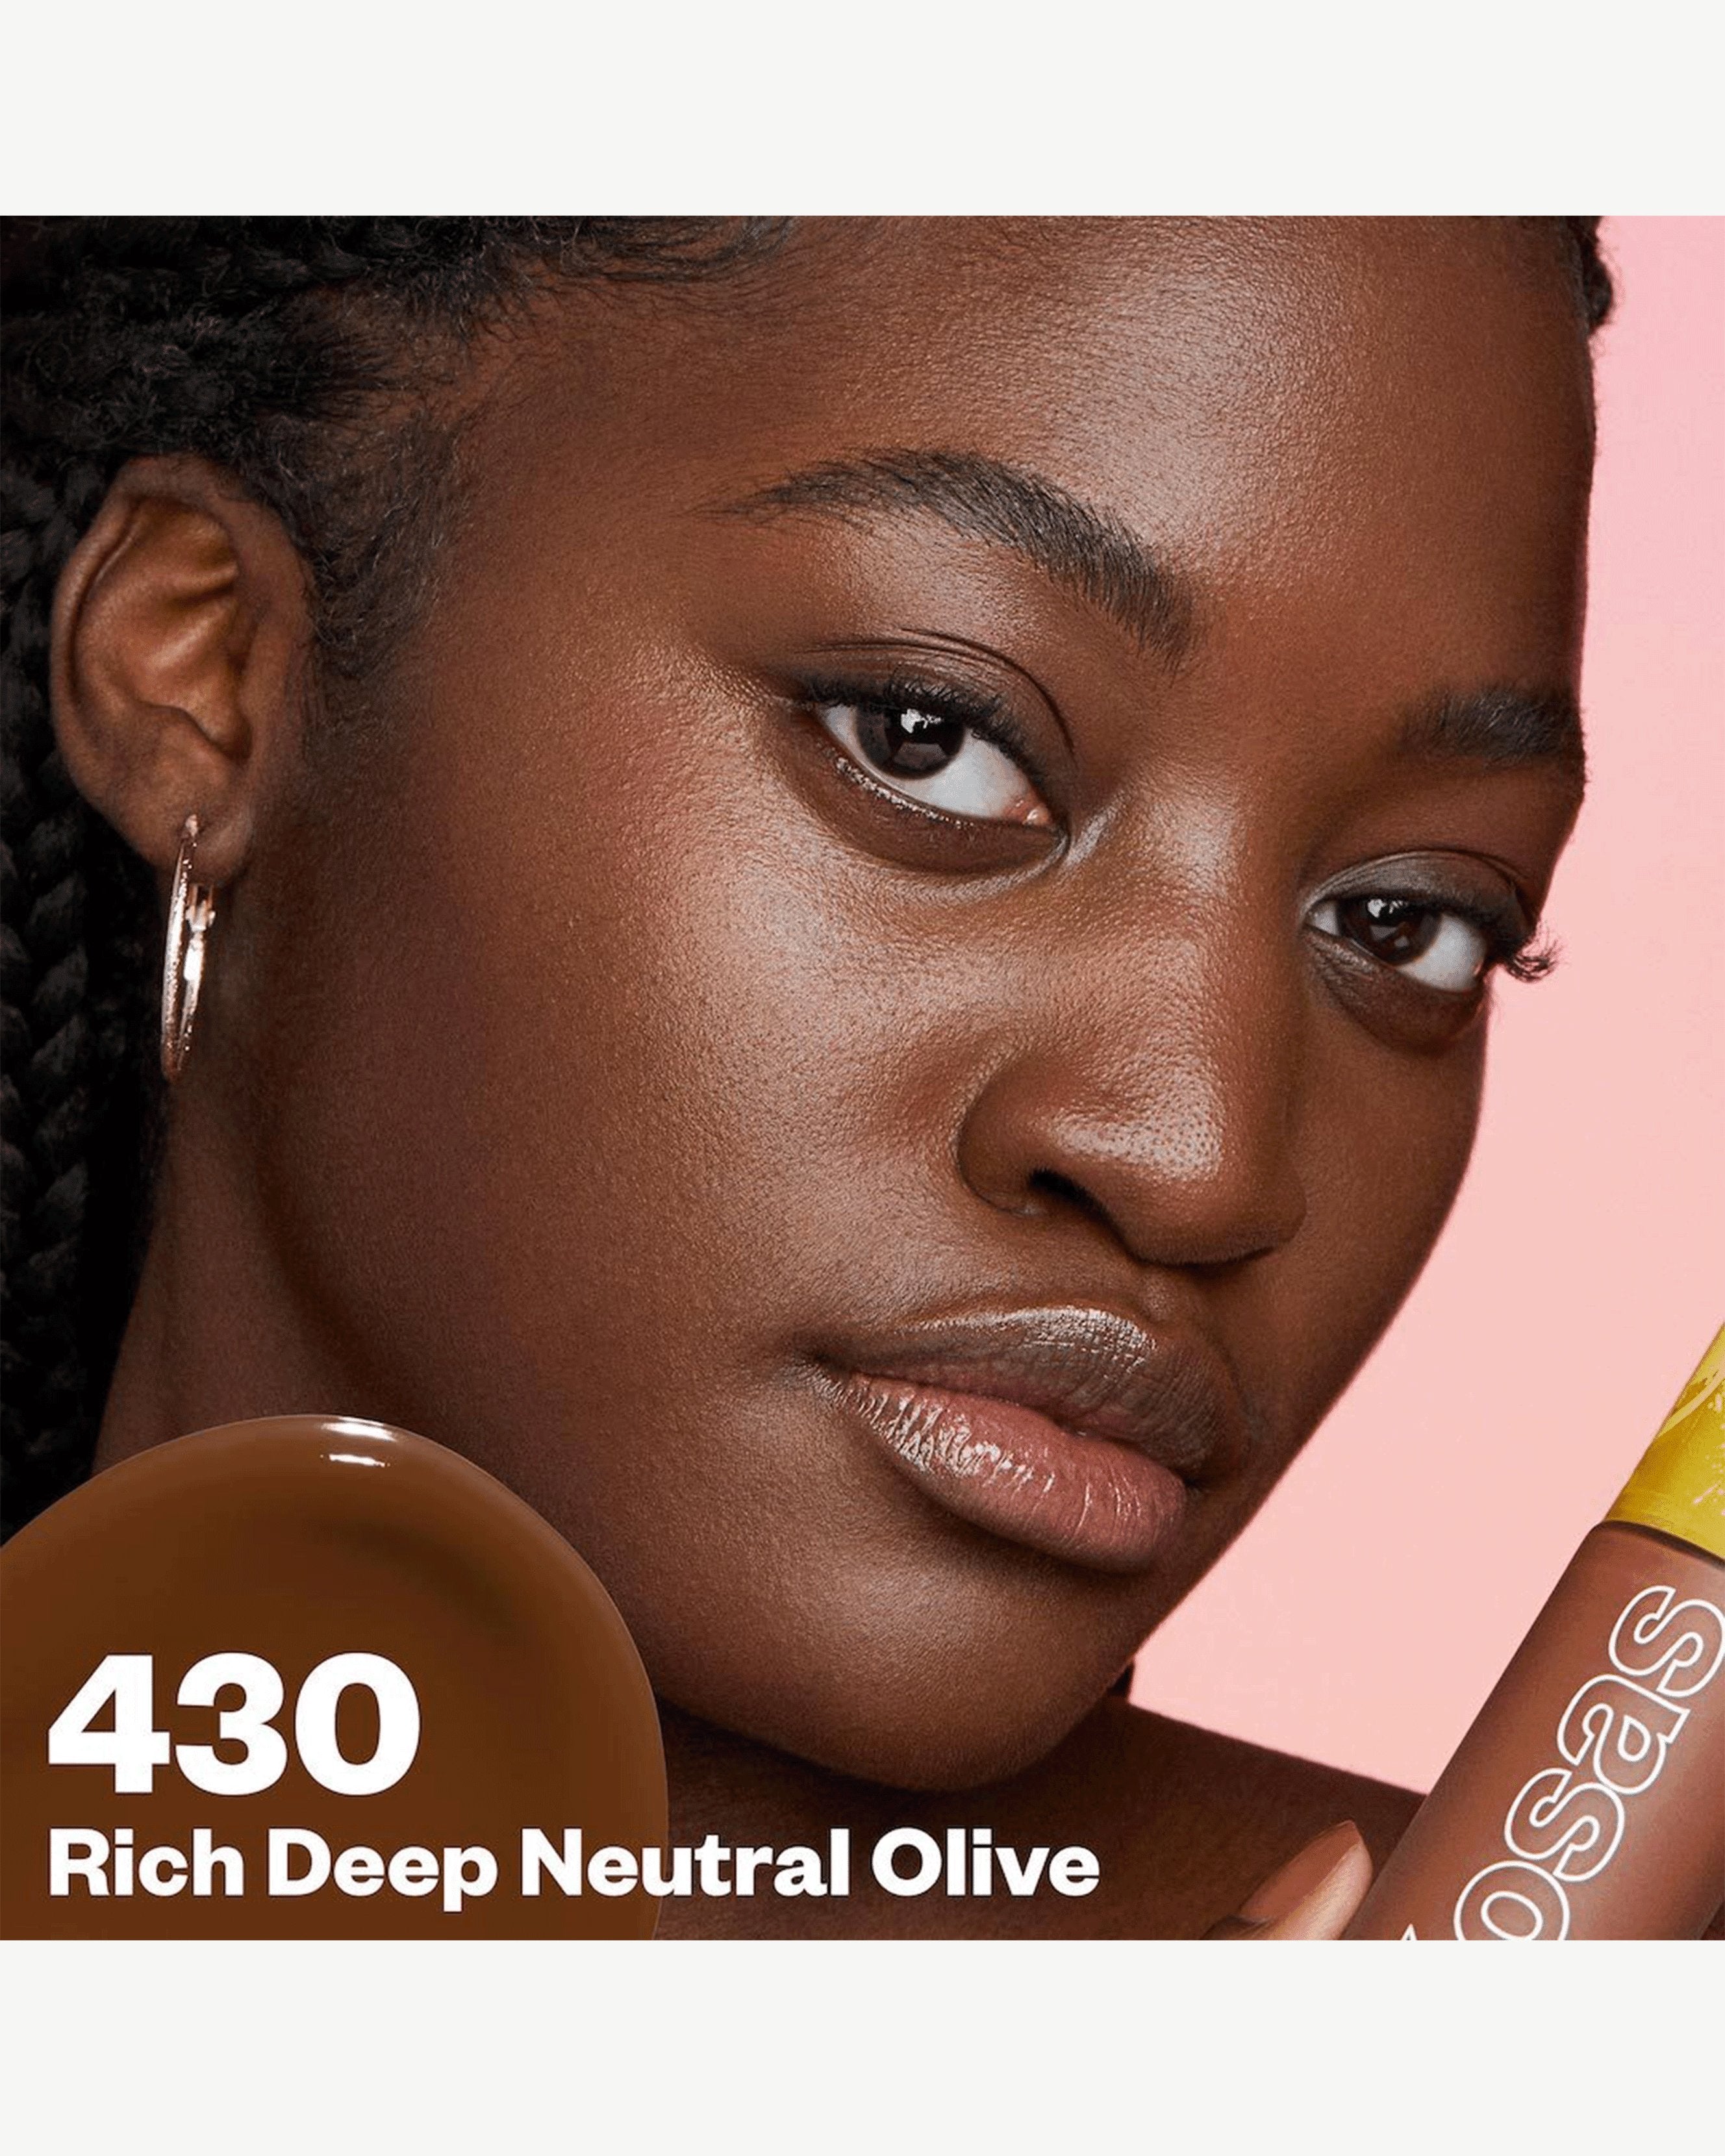 Rich Deep Neutral Olive 430 (rich deep with neutral olive undertones)